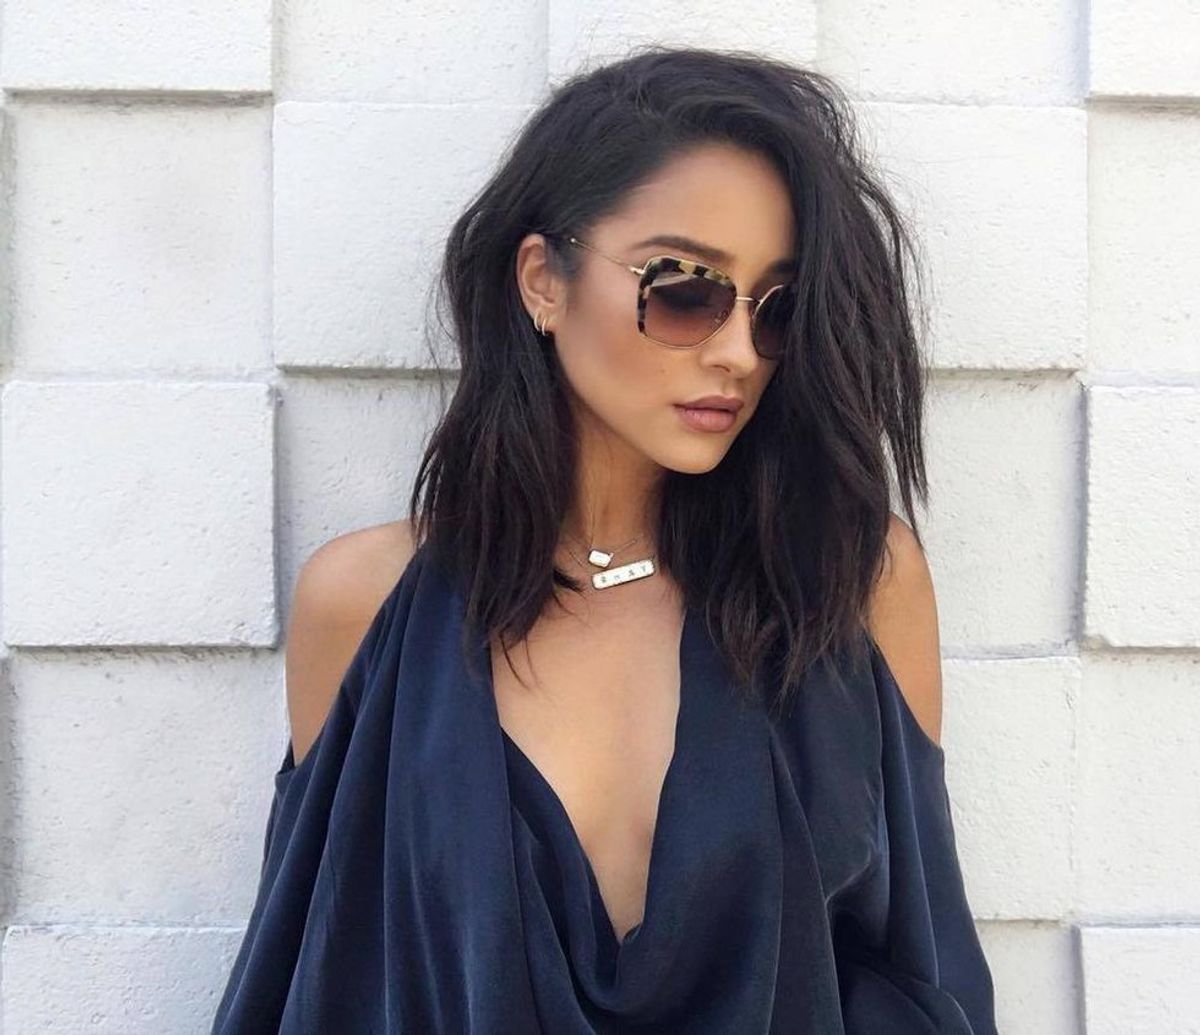 Simple Is The New Fierce: 20 Of Shay Mitchell's Best Looks